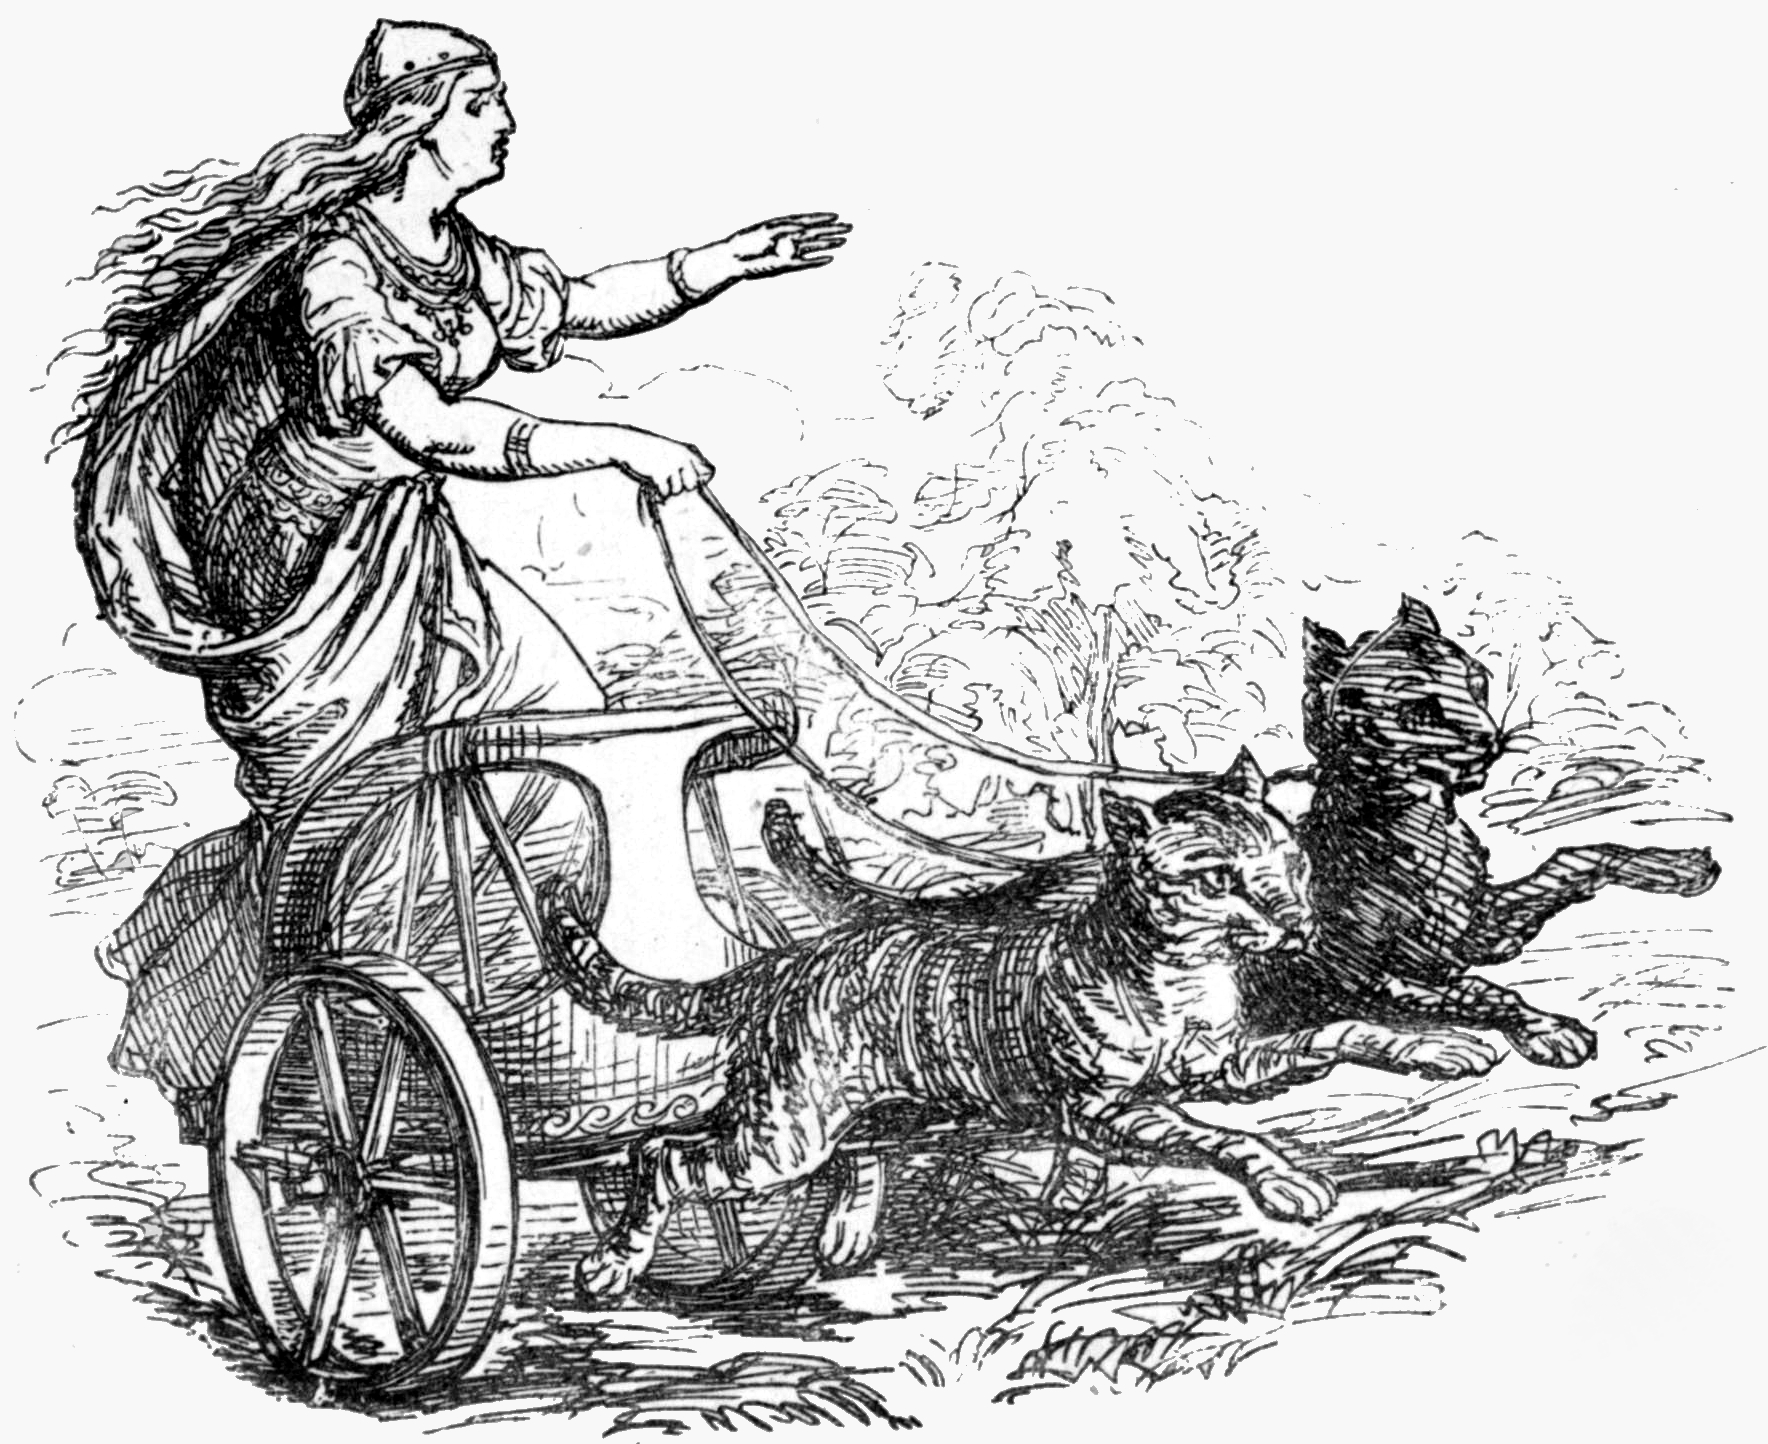 A goddess riding in her wagon pulled by cats